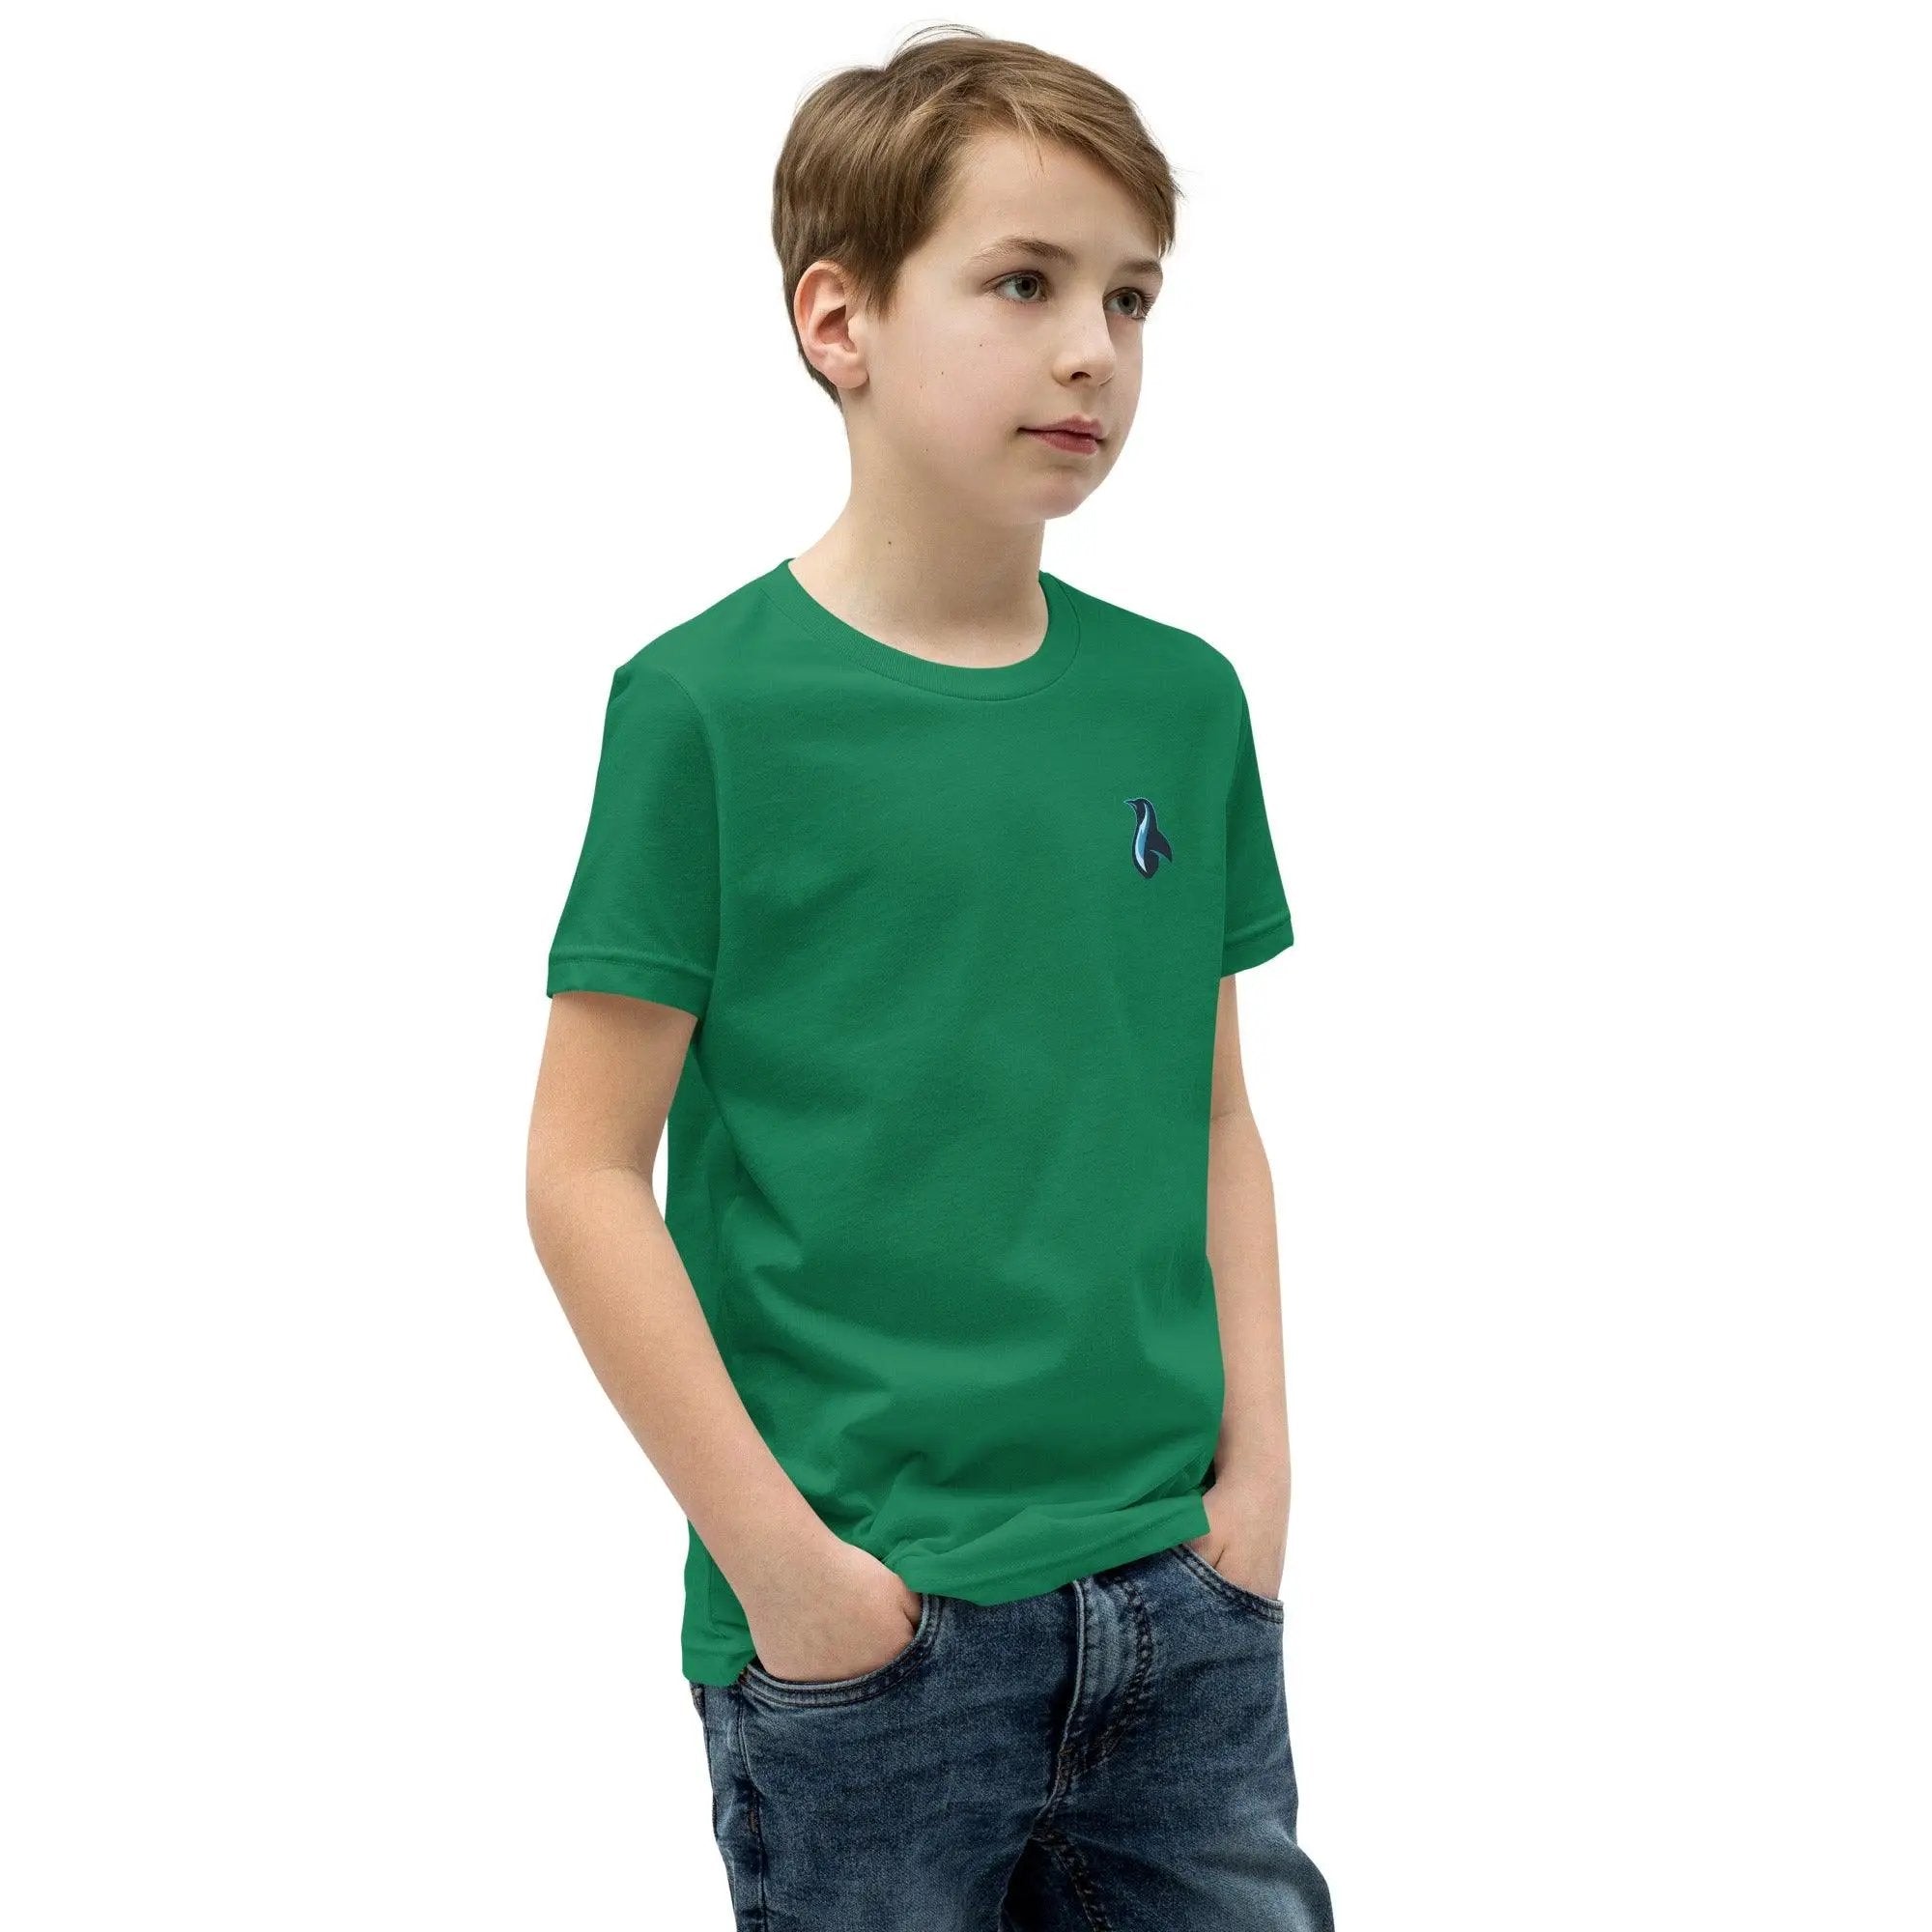 Why Did It Have To Be Snakes? Youth Short Sleeve T-Shirt